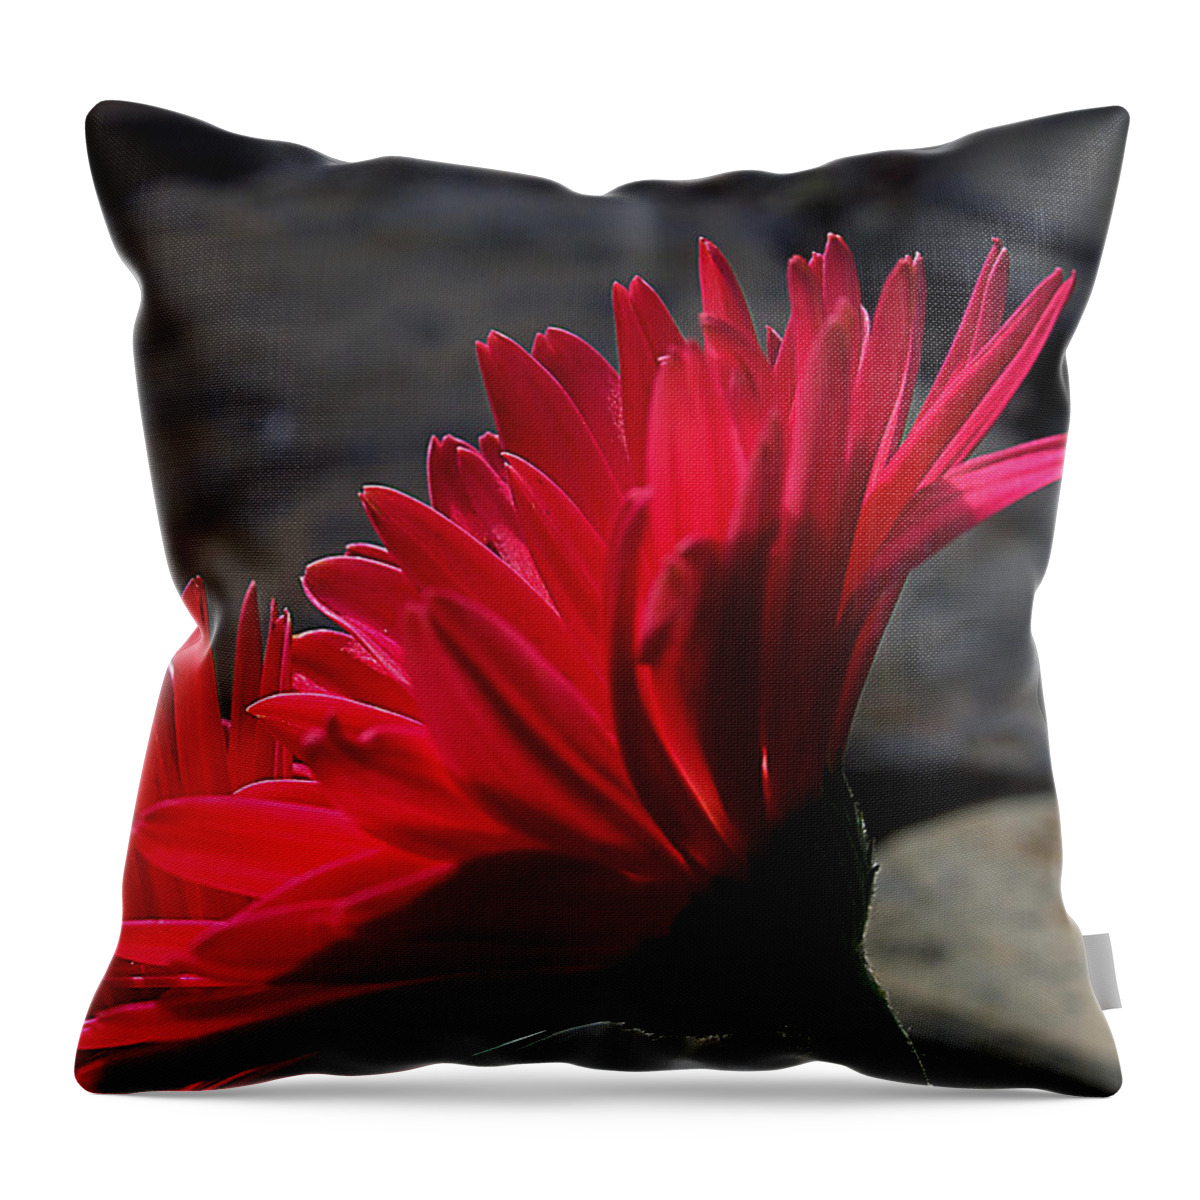 English Daisies Throw Pillow featuring the photograph Red English Daisy by Joe Schofield